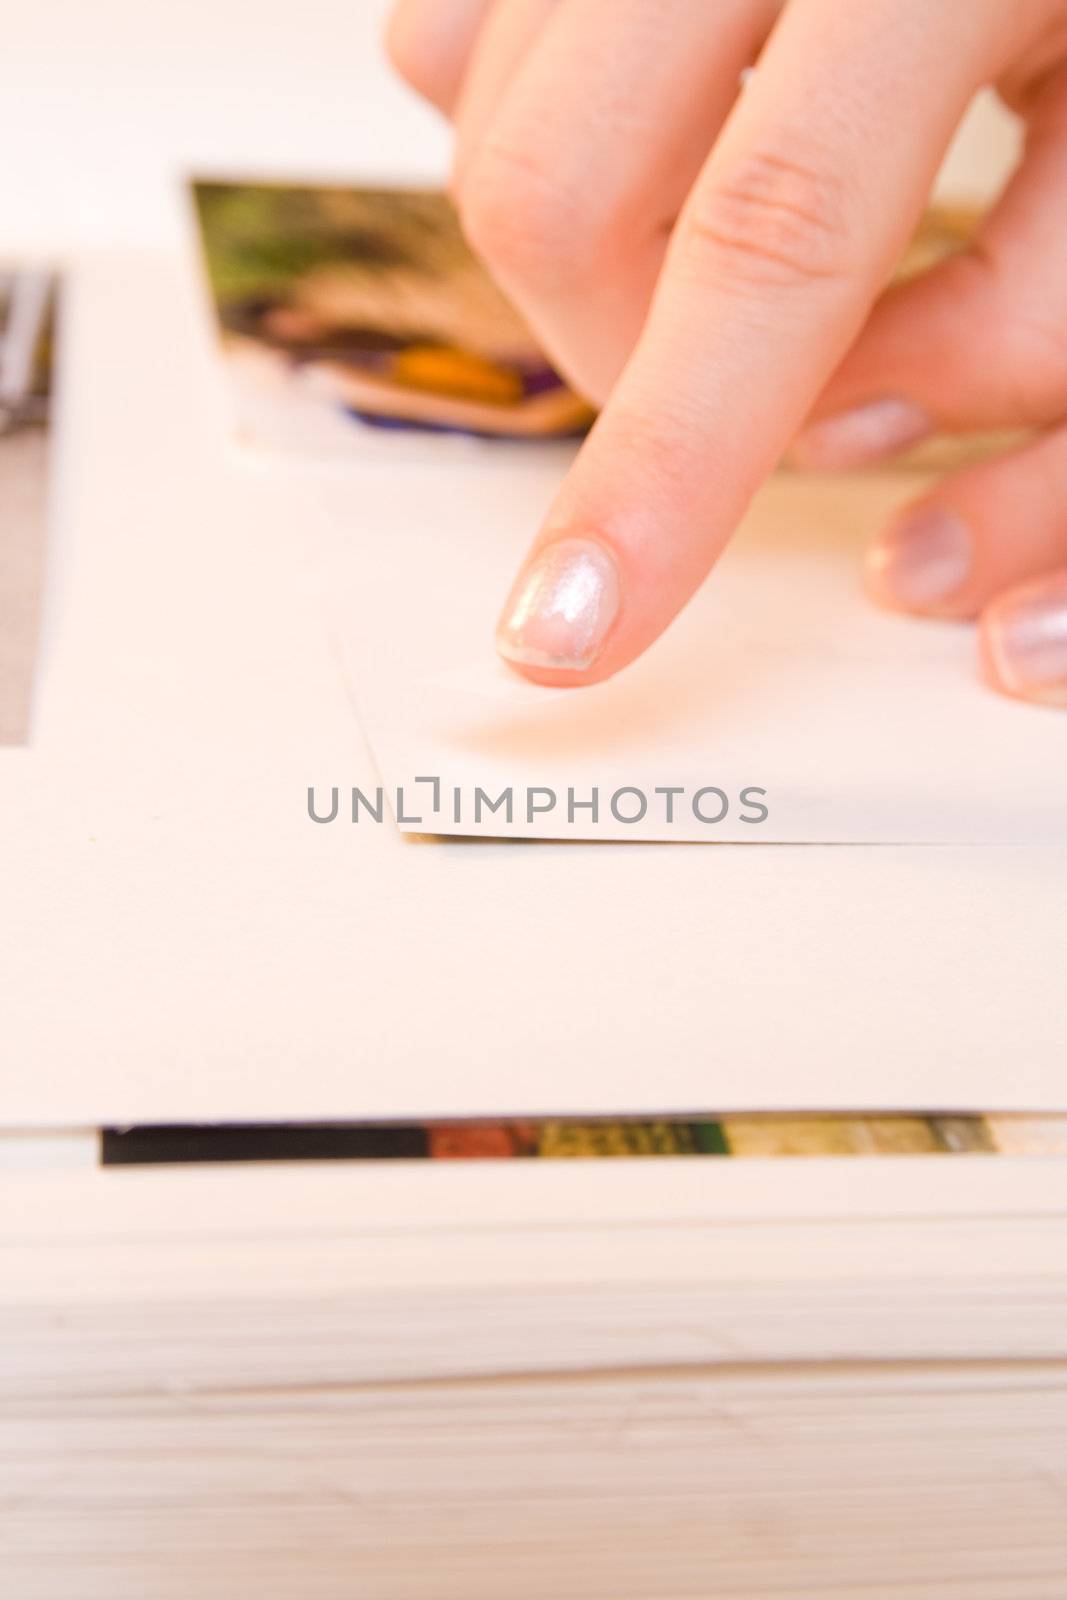 Woman hands sticking images in her photo album. Images can be replaced.